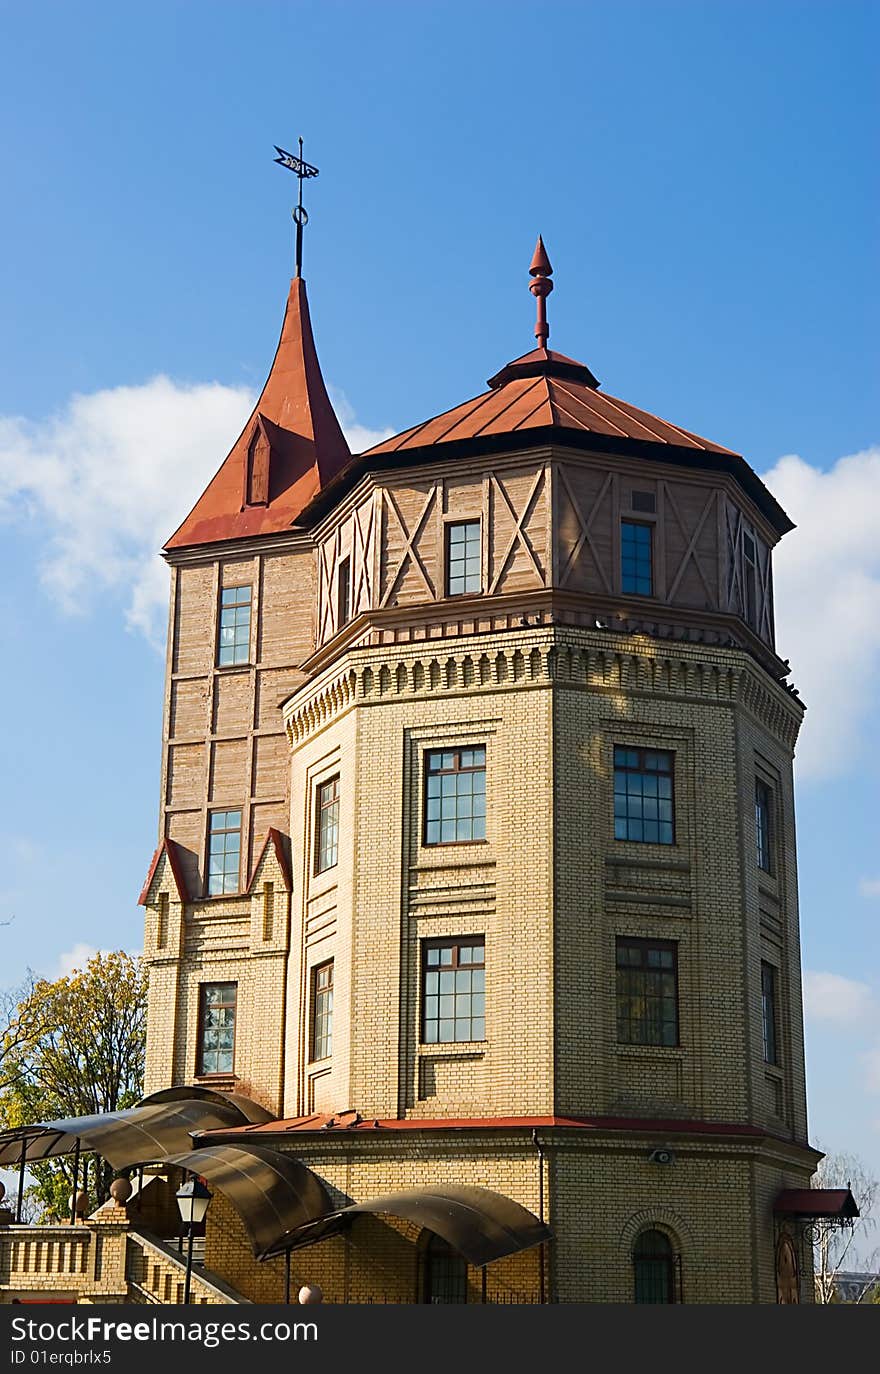 Brick building with a wooden tower